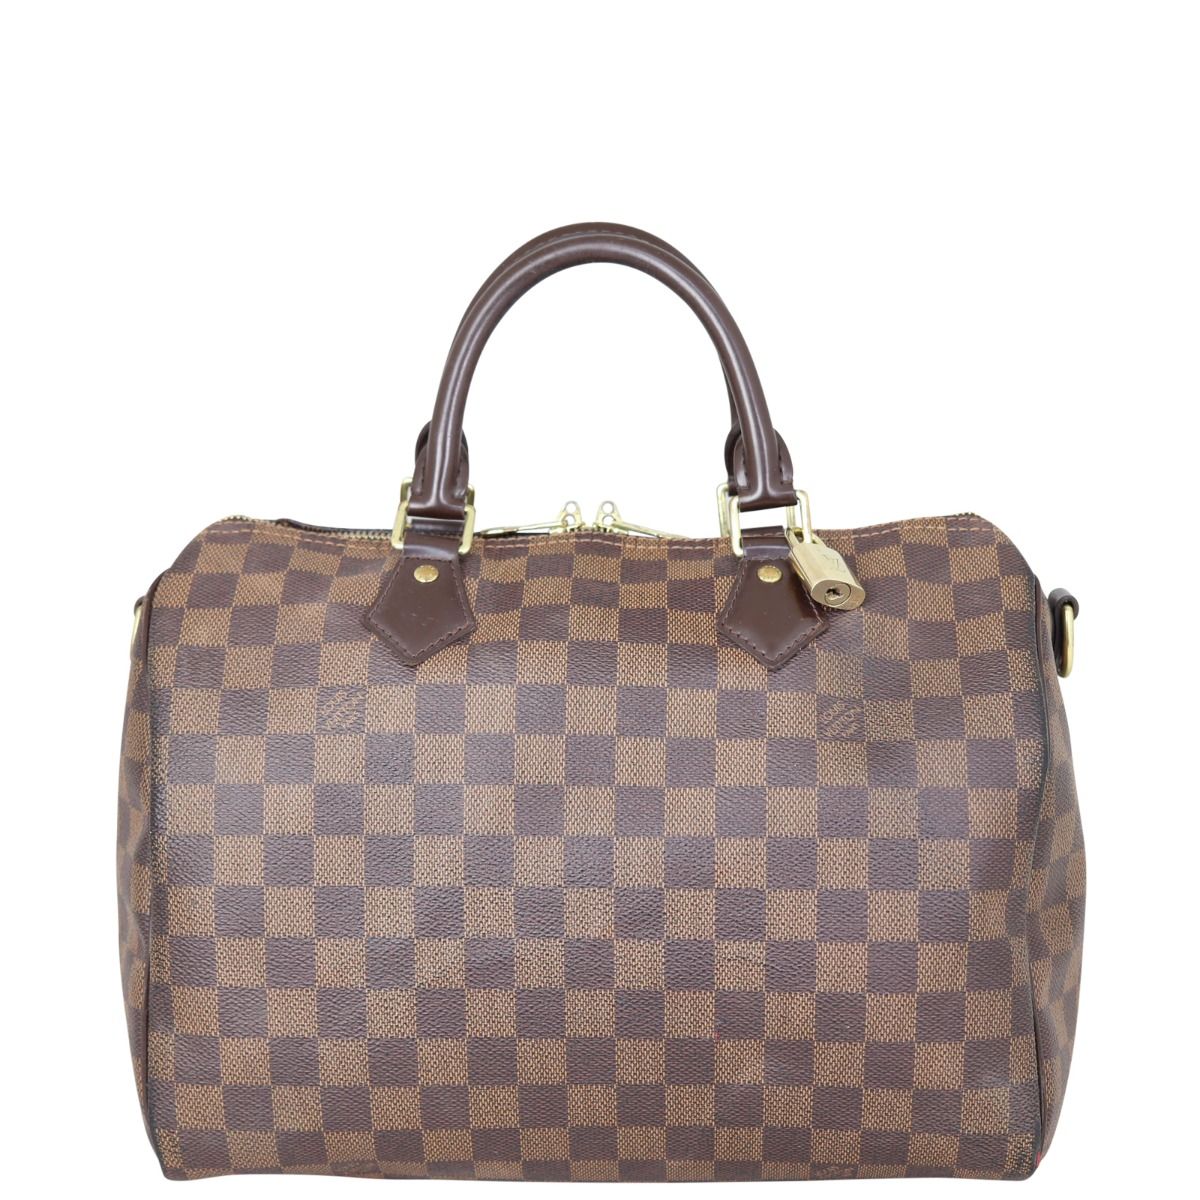 Away From Blue  Aussie Mum Style, Away From The Blue Jeans Rut: Dresses,  Louis Vuitton Speedy Bandouliere Bag in Damier Ebene